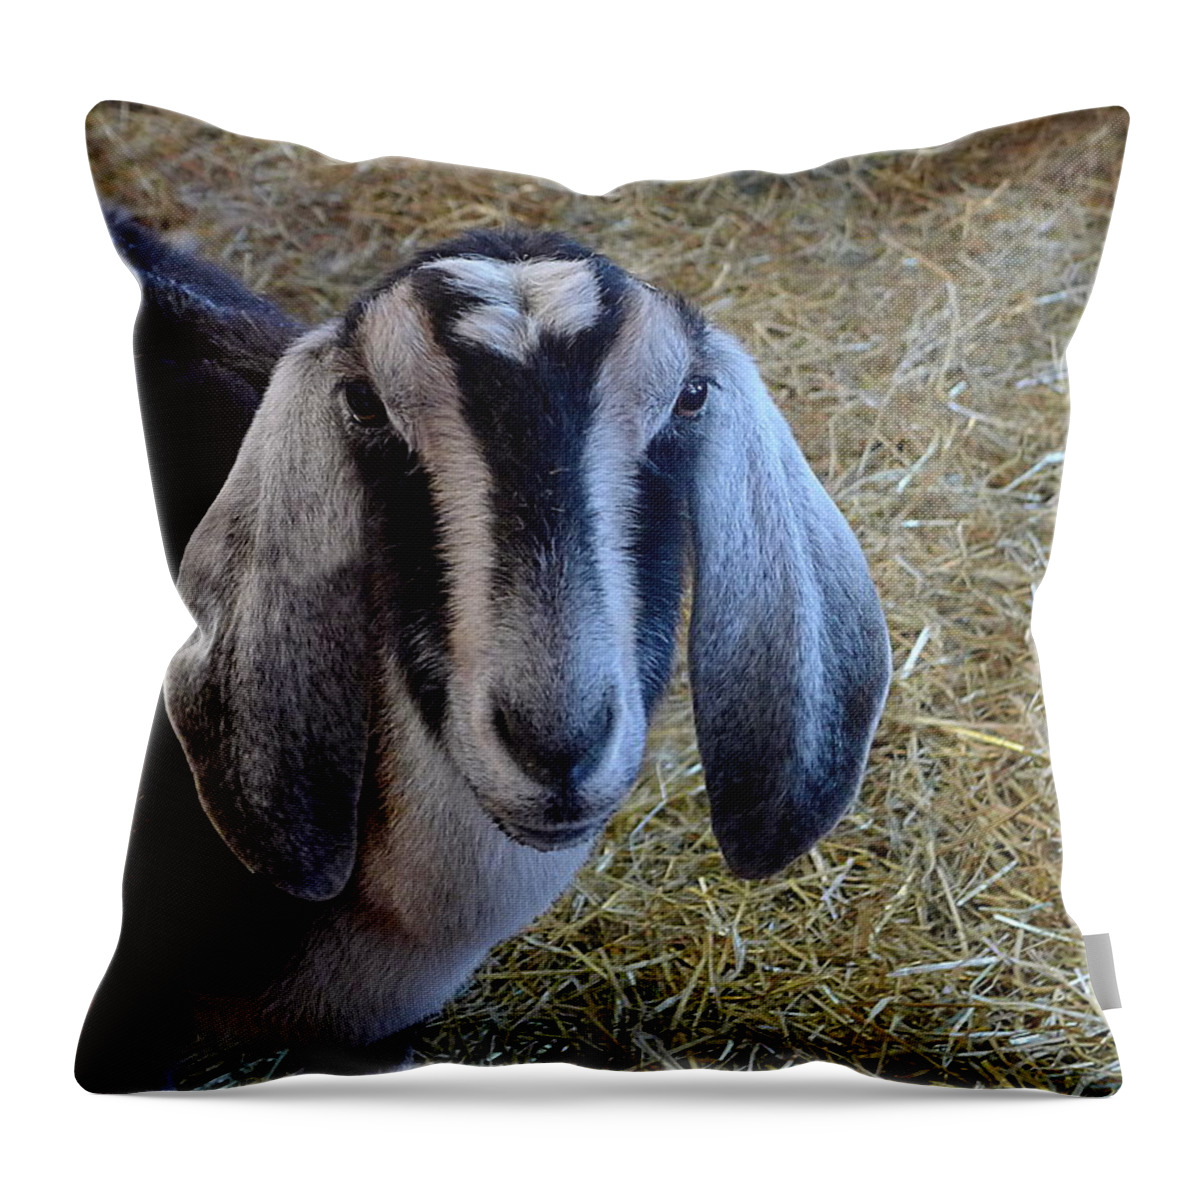 Richard Reeve Throw Pillow featuring the photograph Nanny Goat by Richard Reeve